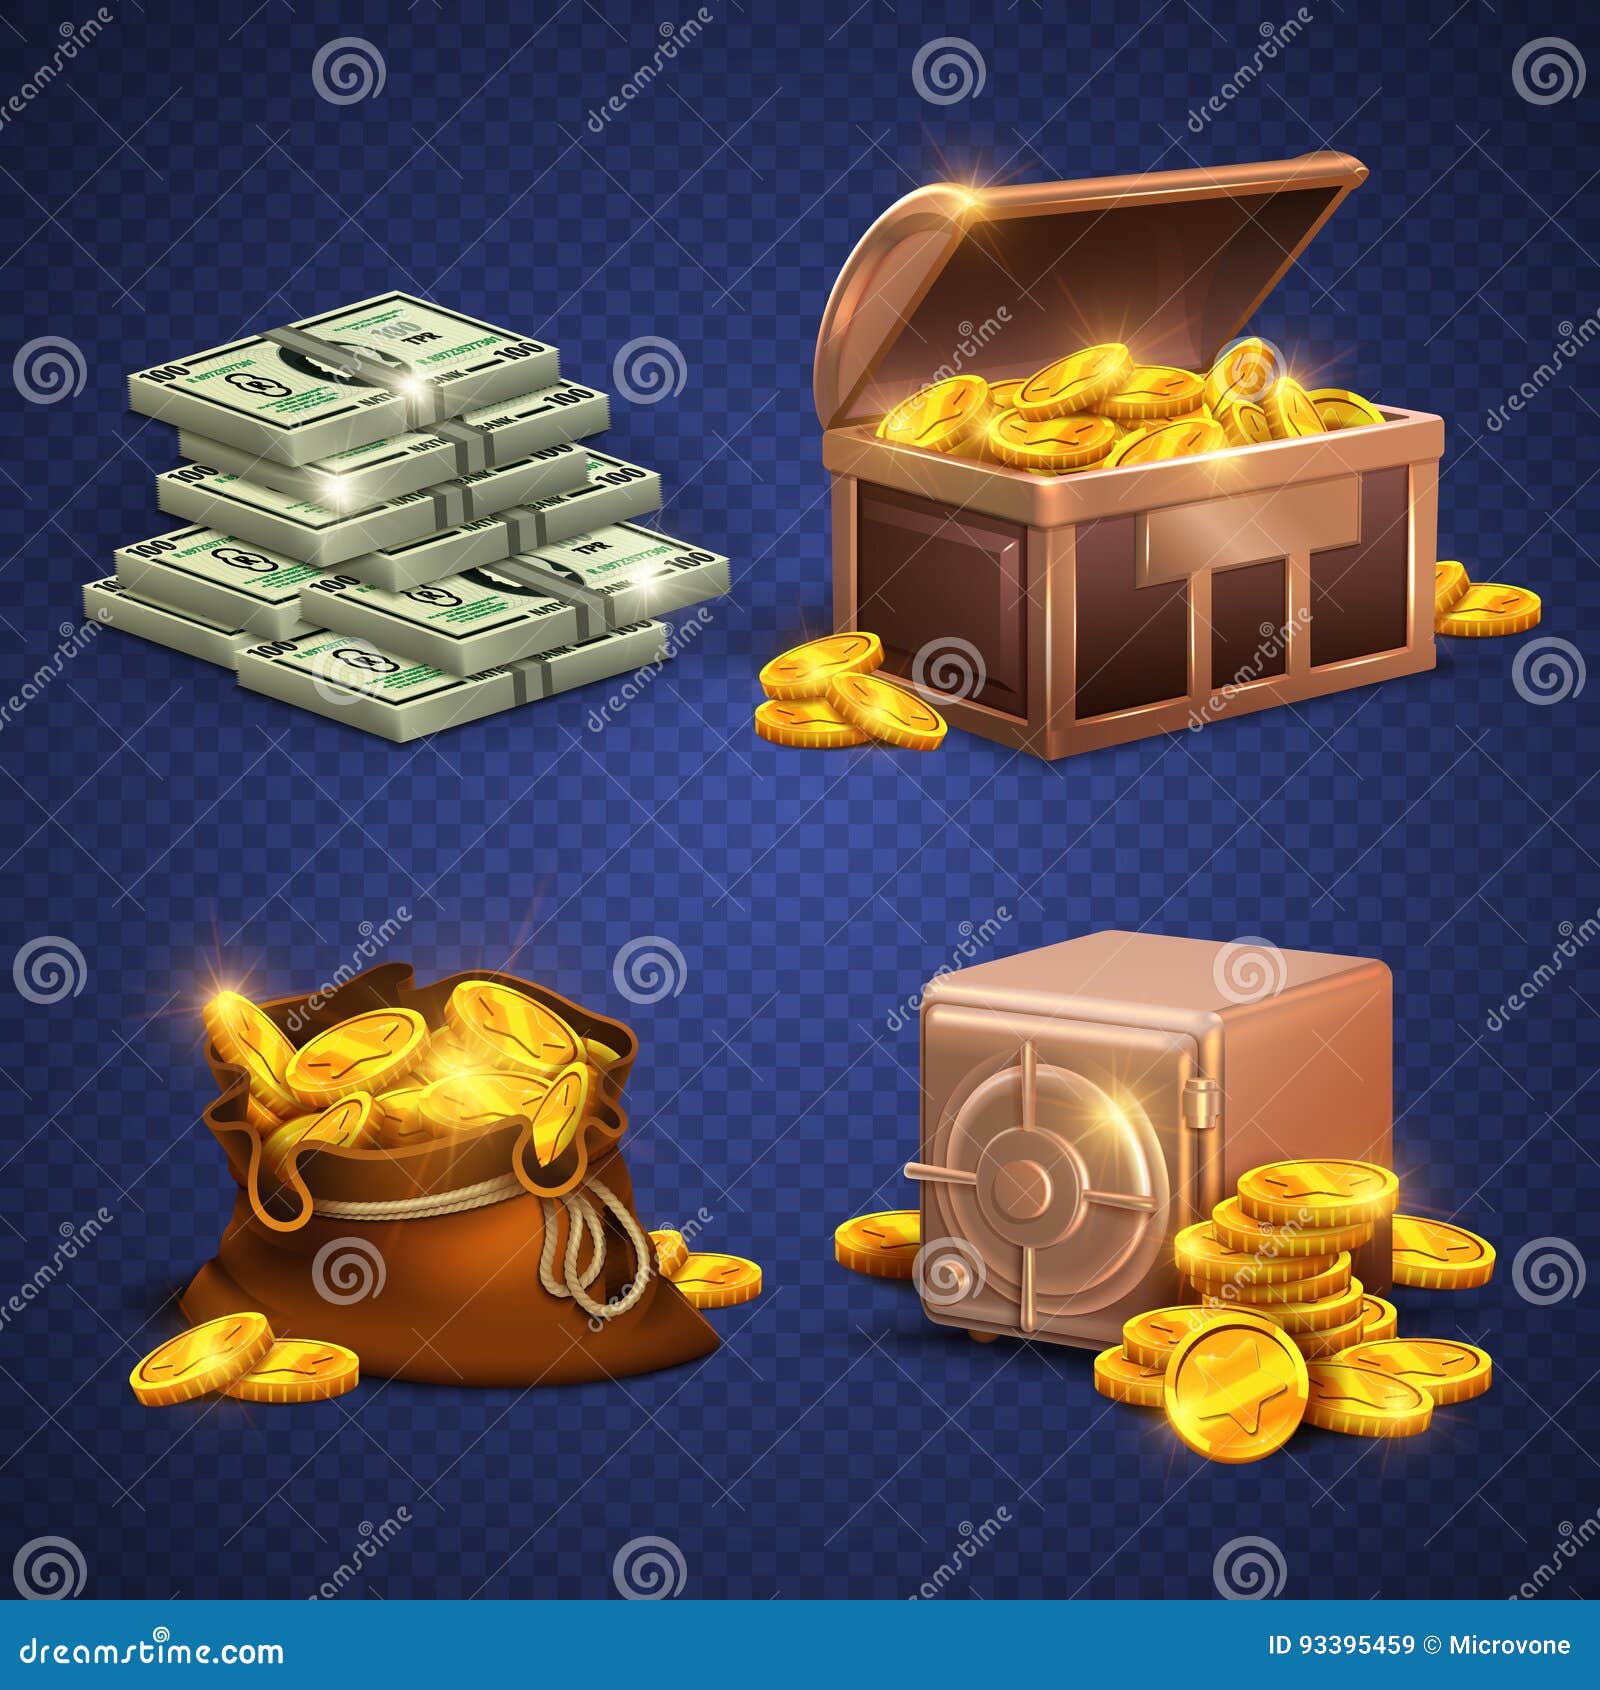 casino  3d signs and money icons. dollars, gold coins in safe deposit and moneybag